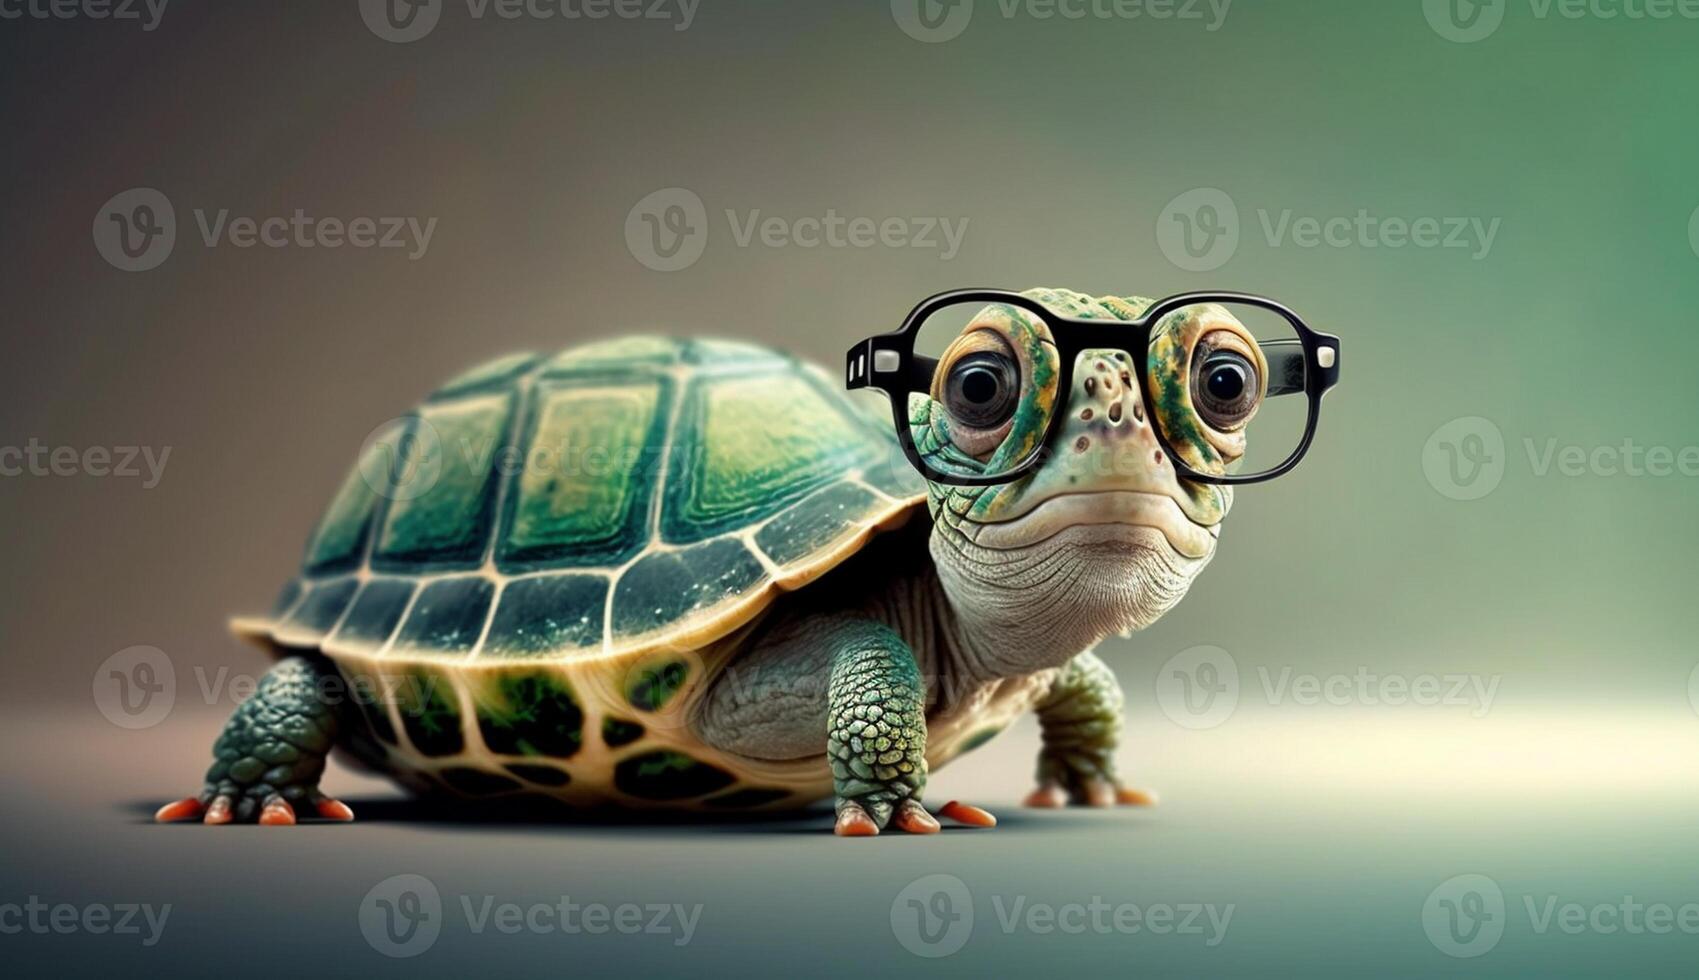 Cute little green turtle with glasses in front of studio background. photo